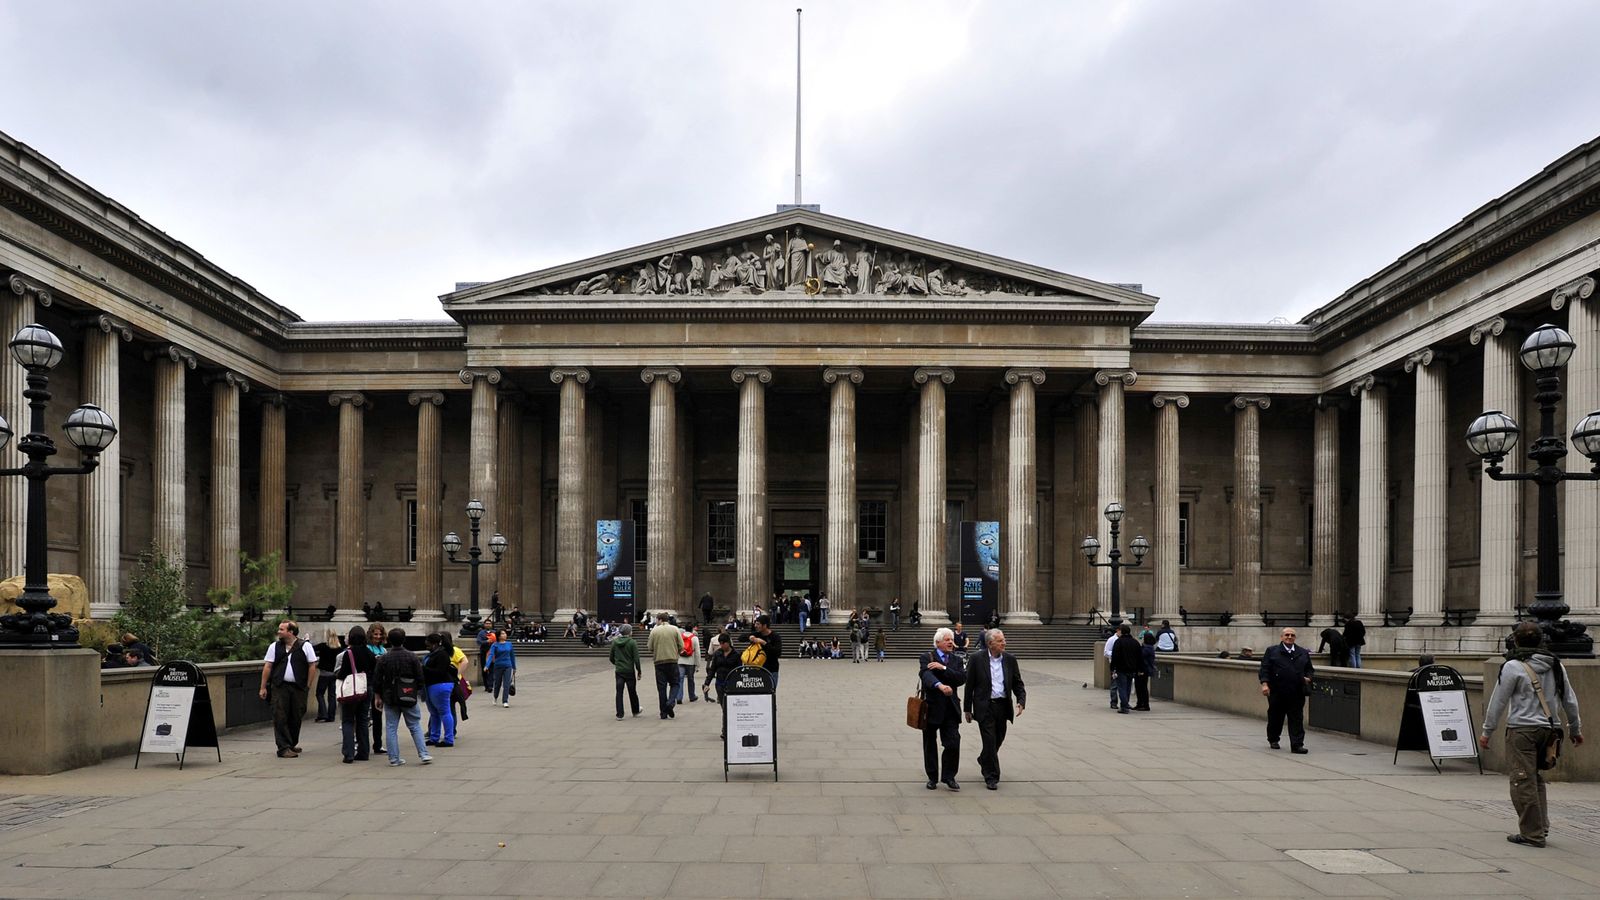 British Museum was warned about thefts years ago, claims gems expert